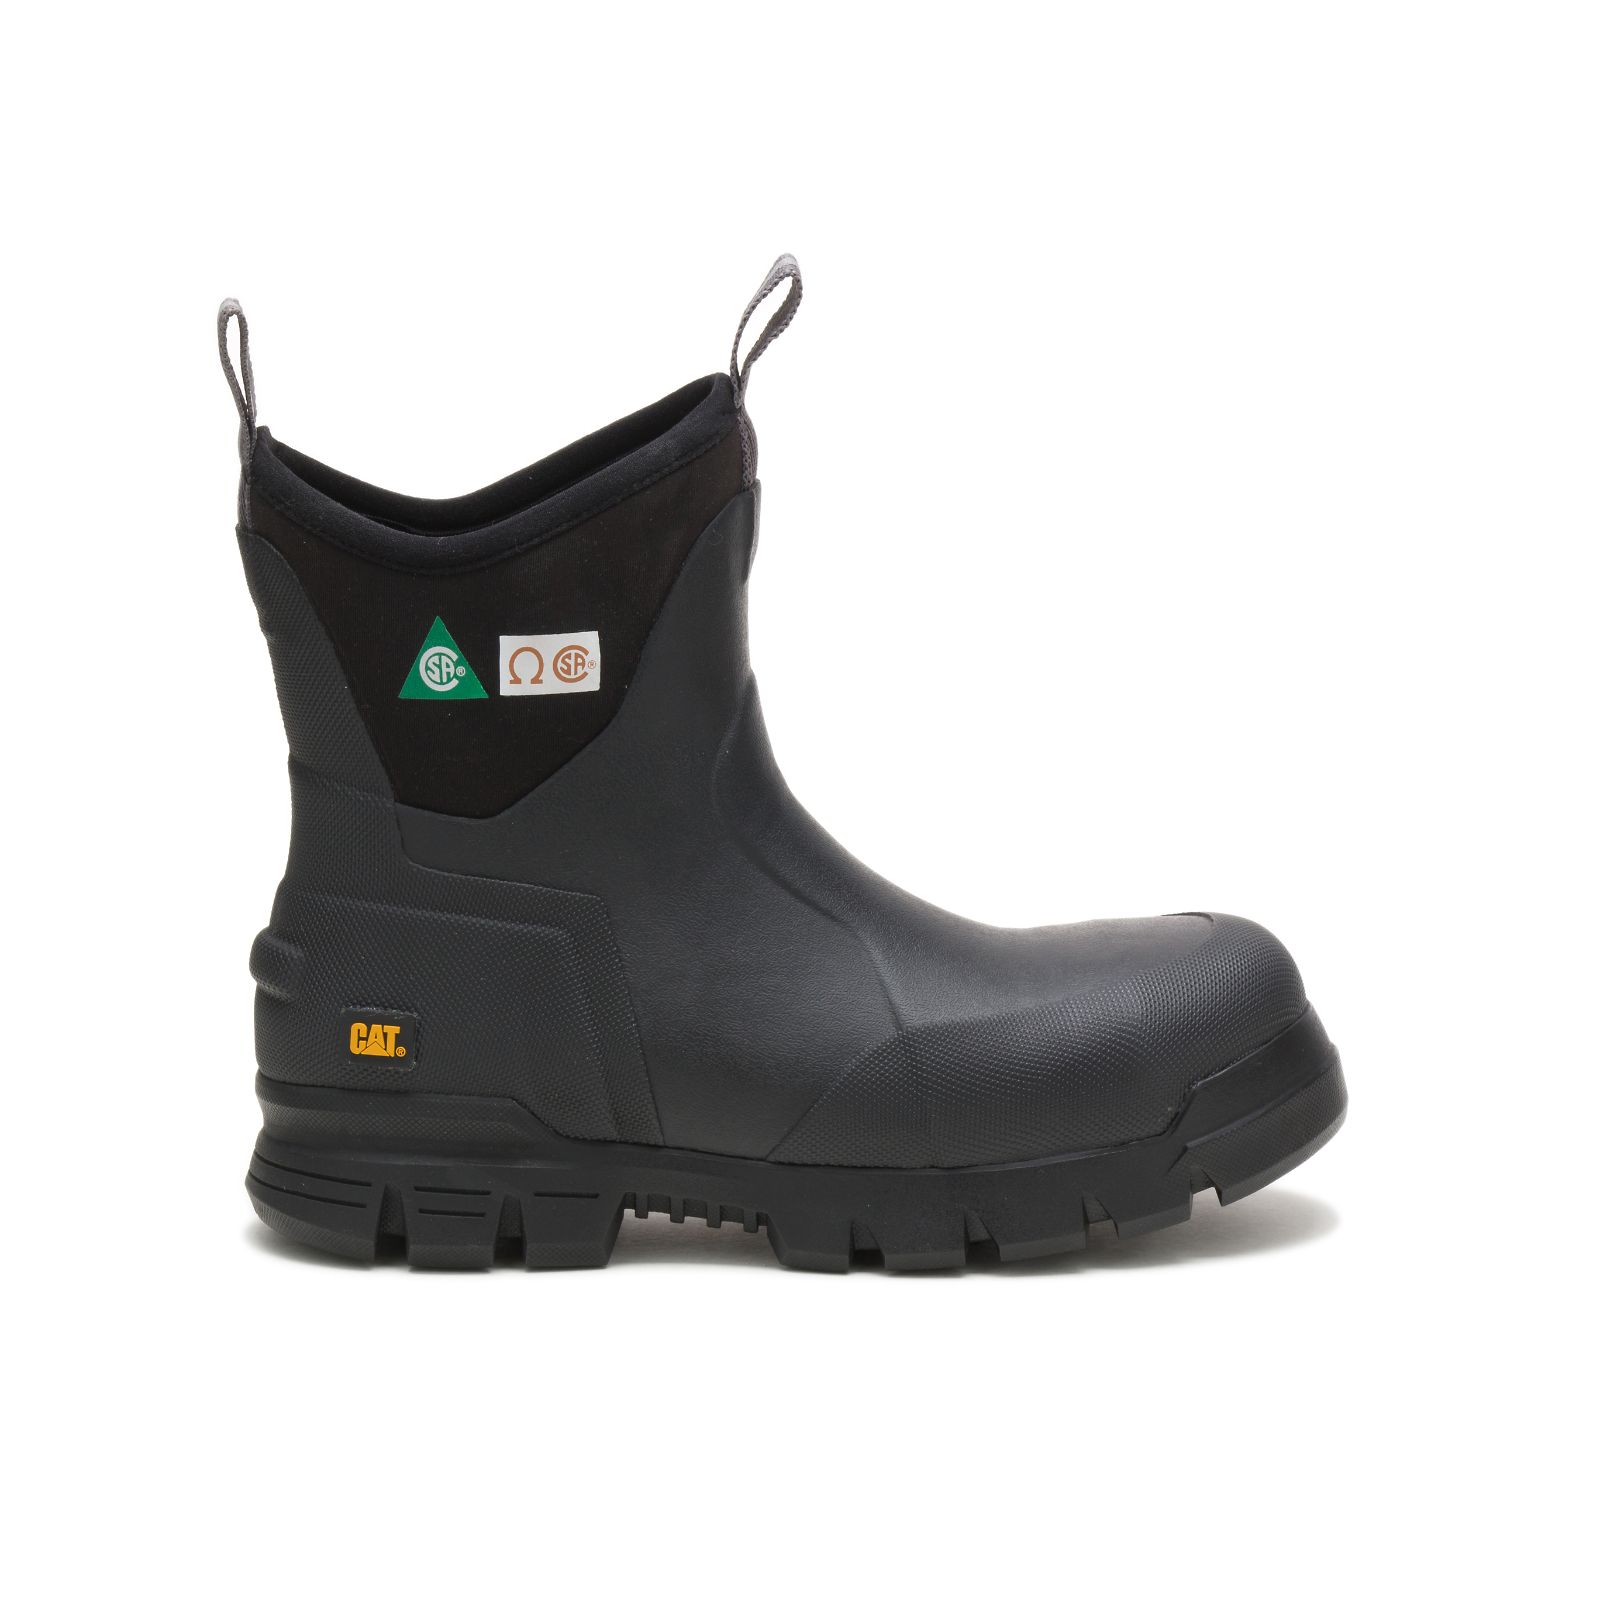 Caterpillar Stormers 6" Steel Toe Csa Philippines - Womens Rubber Boots - Black 37214OJVT